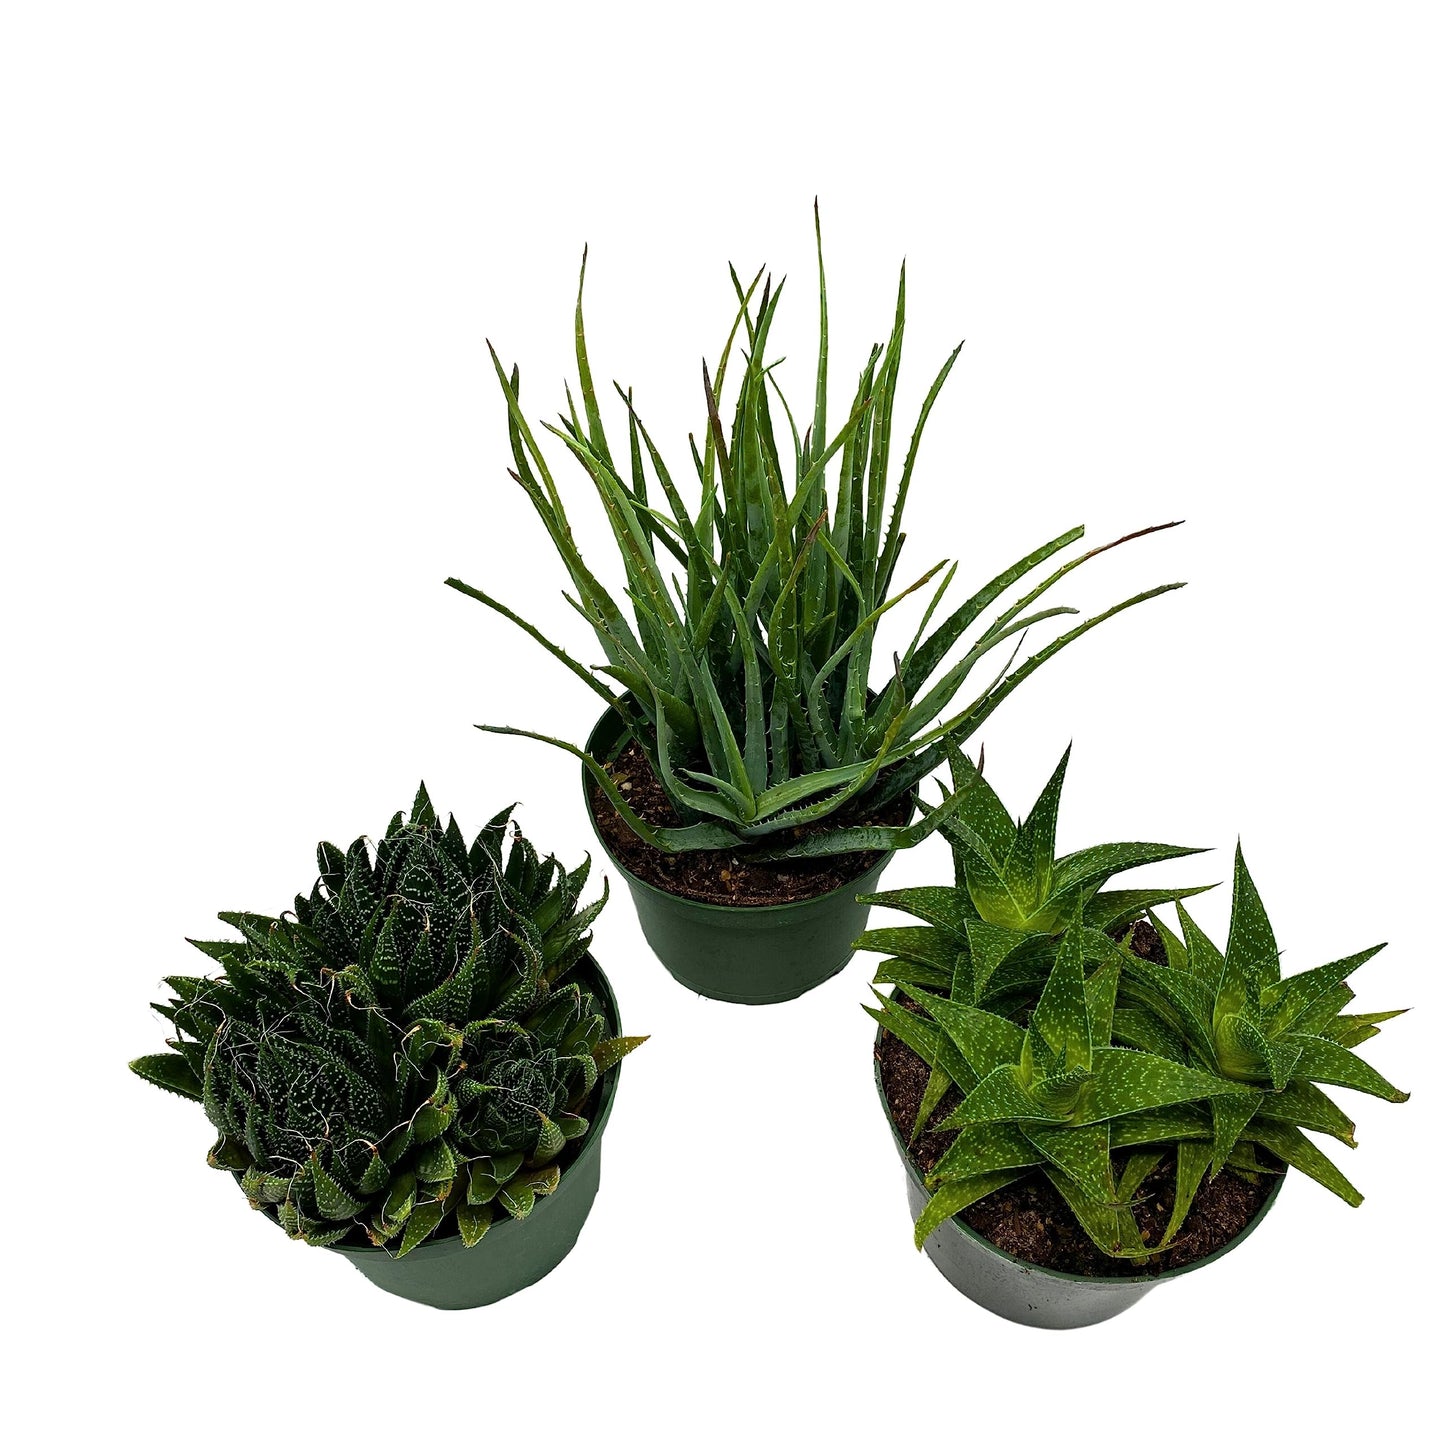 Aloe Assortment, Aloe Variety Set of 3, Grower's Choice in 6 inch pots